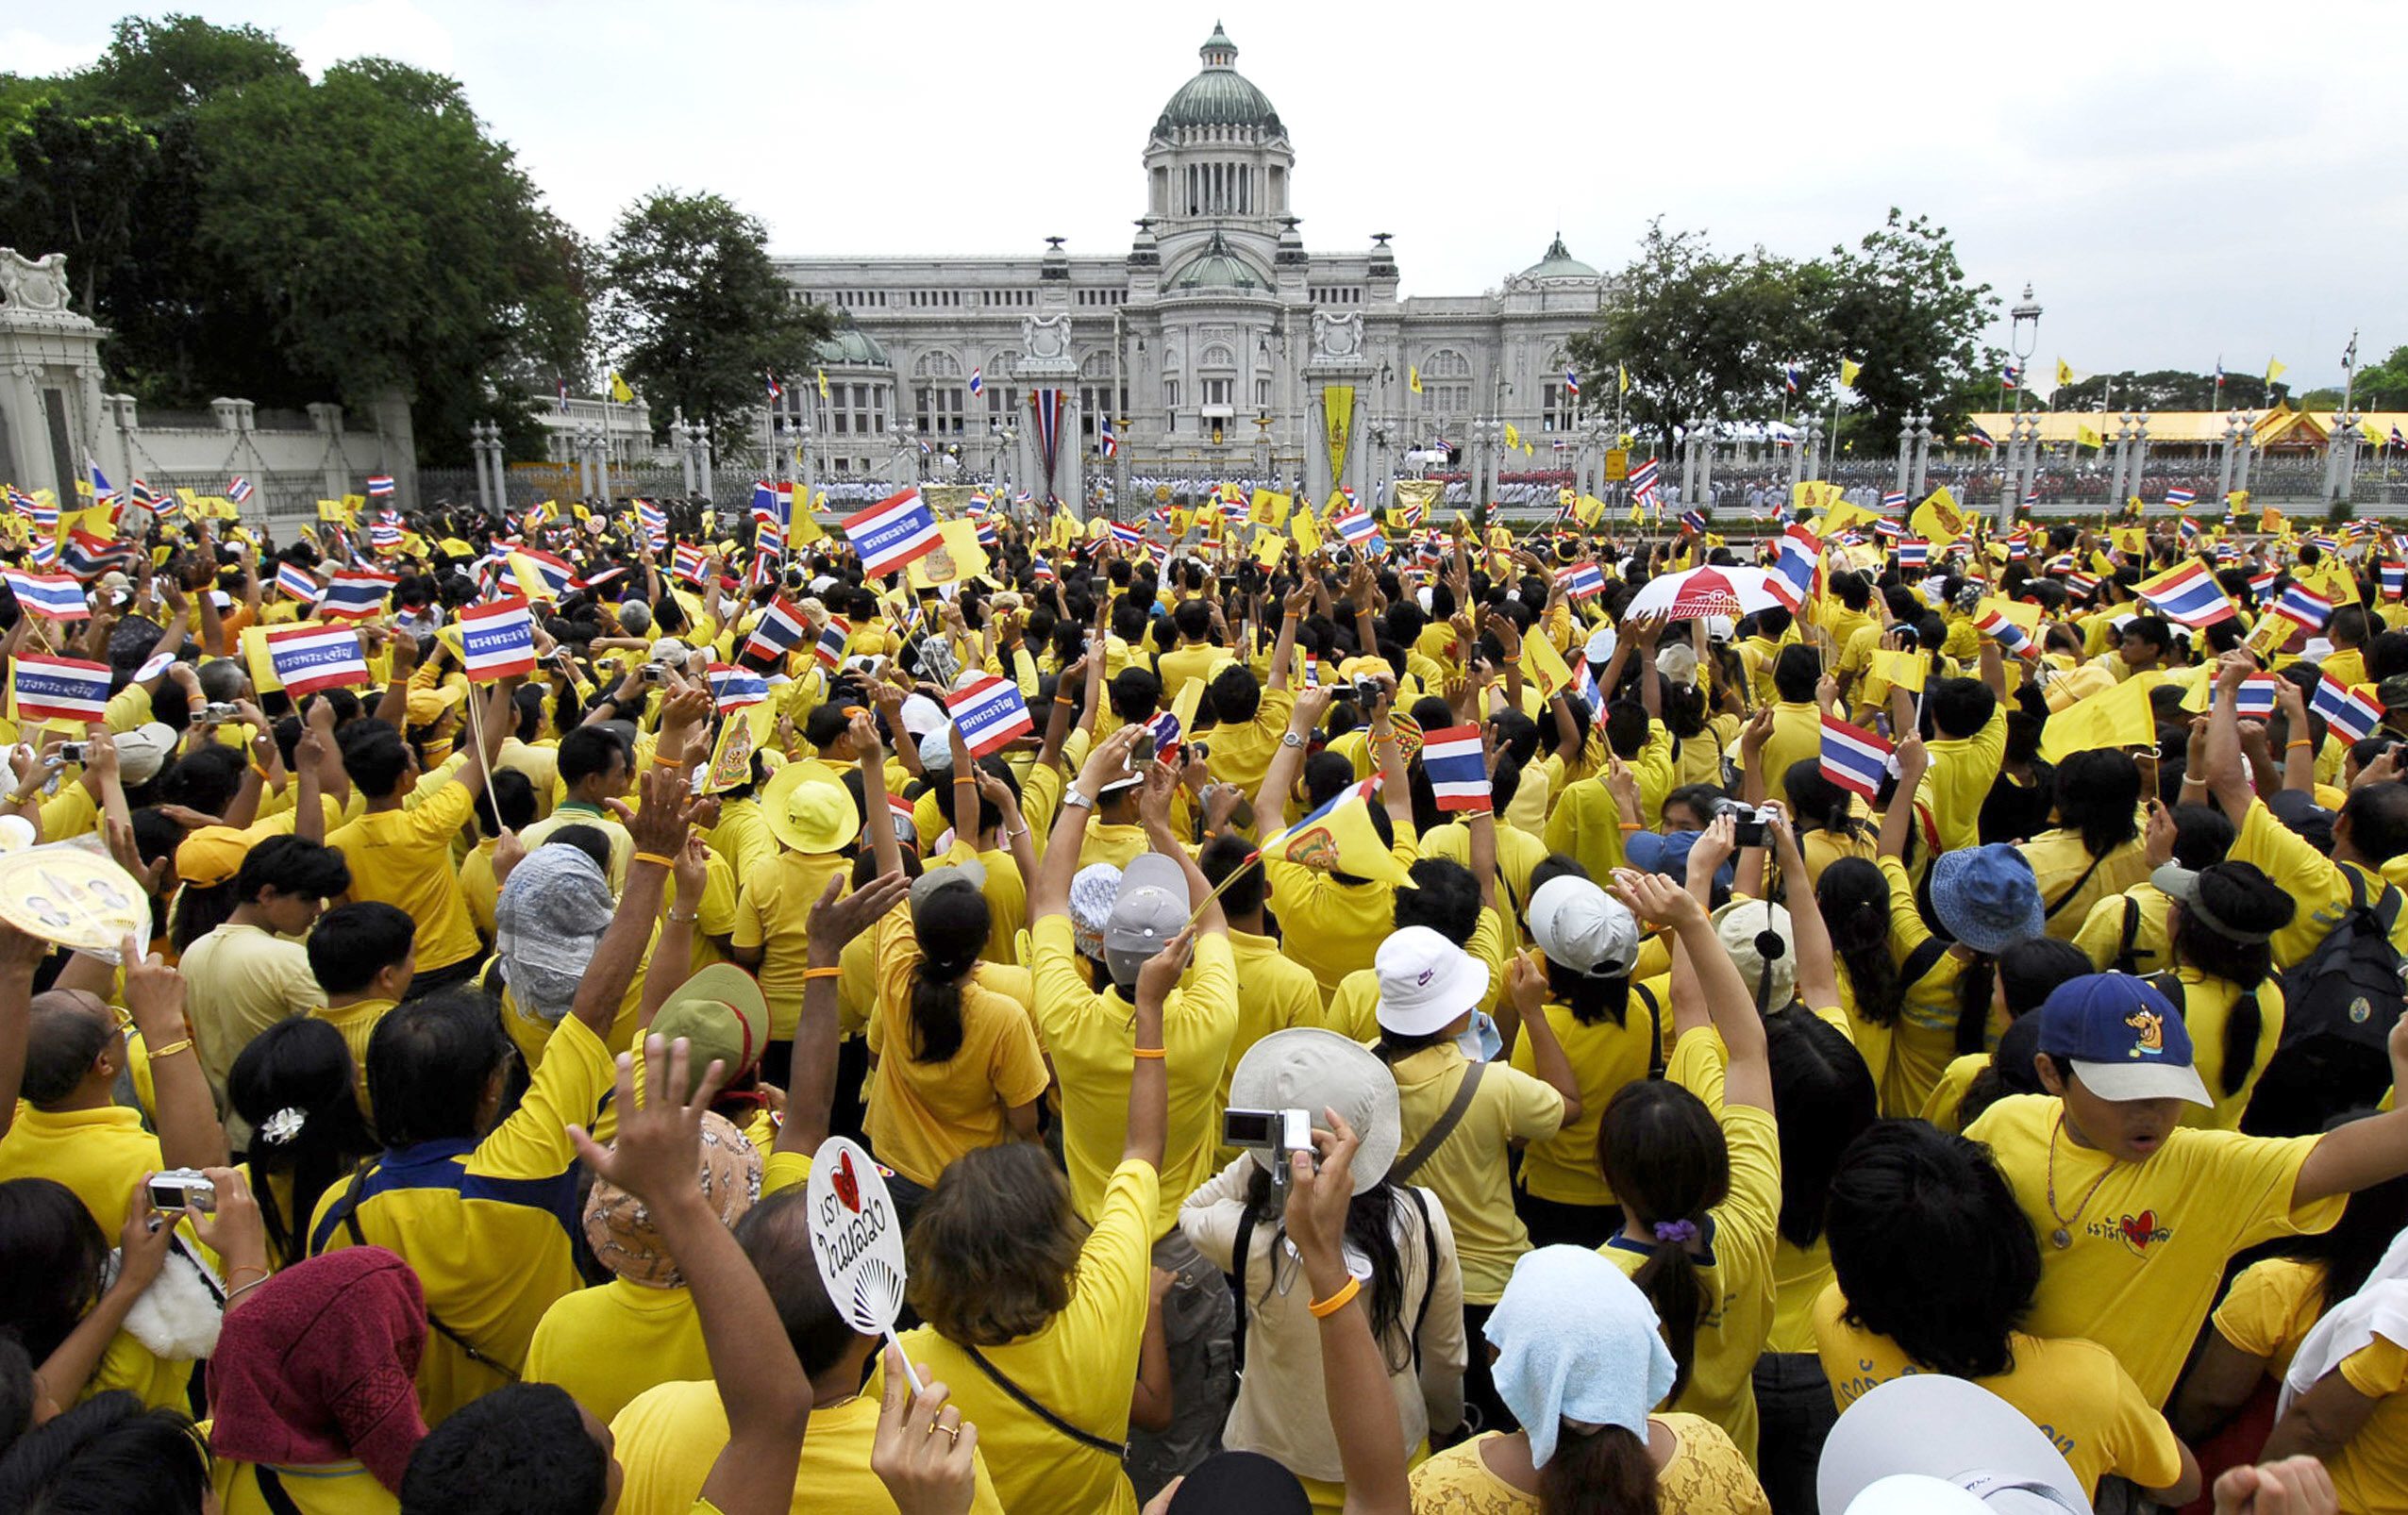 Thousands of Thais in yellow T-shirts wave to their beloved King Bhumibol Adulyadej in front of the Dusit Palace in Bangkok, 09 June 2006. Thai King Bhumibol Adulyadej called for unity among his people after months of political turmoil, in a speech to mark his 60th anniversary on the throne. Half a million Thais wearing yellow to honor the King swarmed into central Bangkok hoping to catch a rare glimpse of the monarch on the 60th anniversary of his rule. RESTRICTED TO EDITORIAL USE AFP PHOTO/ROYAL PALACE/HO / AFP PHOTO / ROYAL PALACE / STR